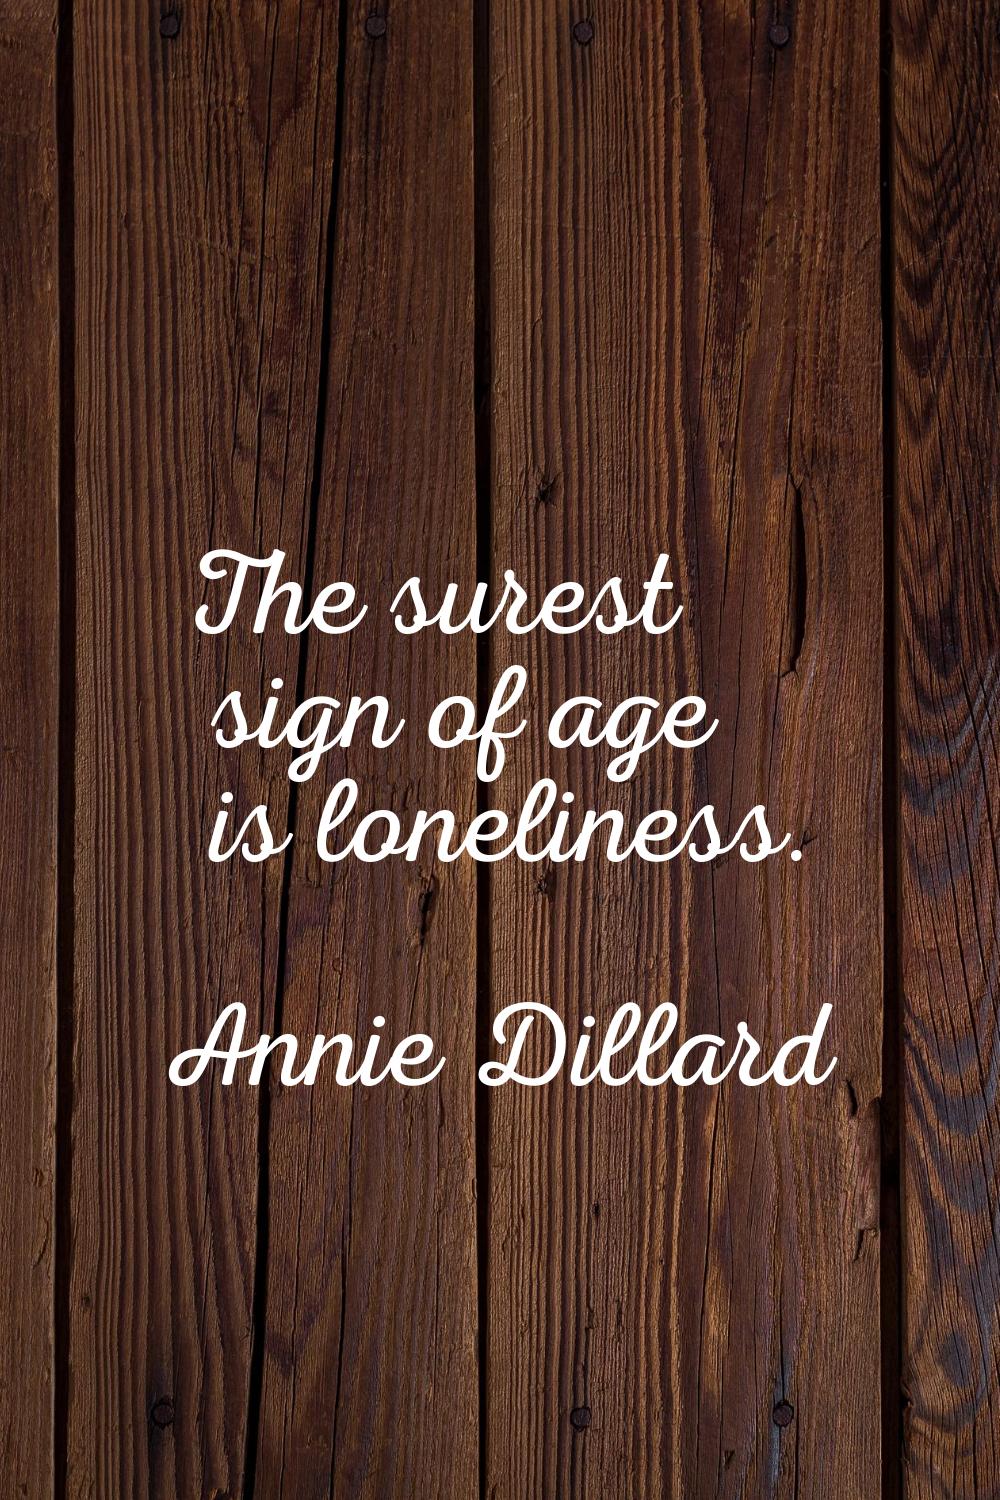 The surest sign of age is loneliness.